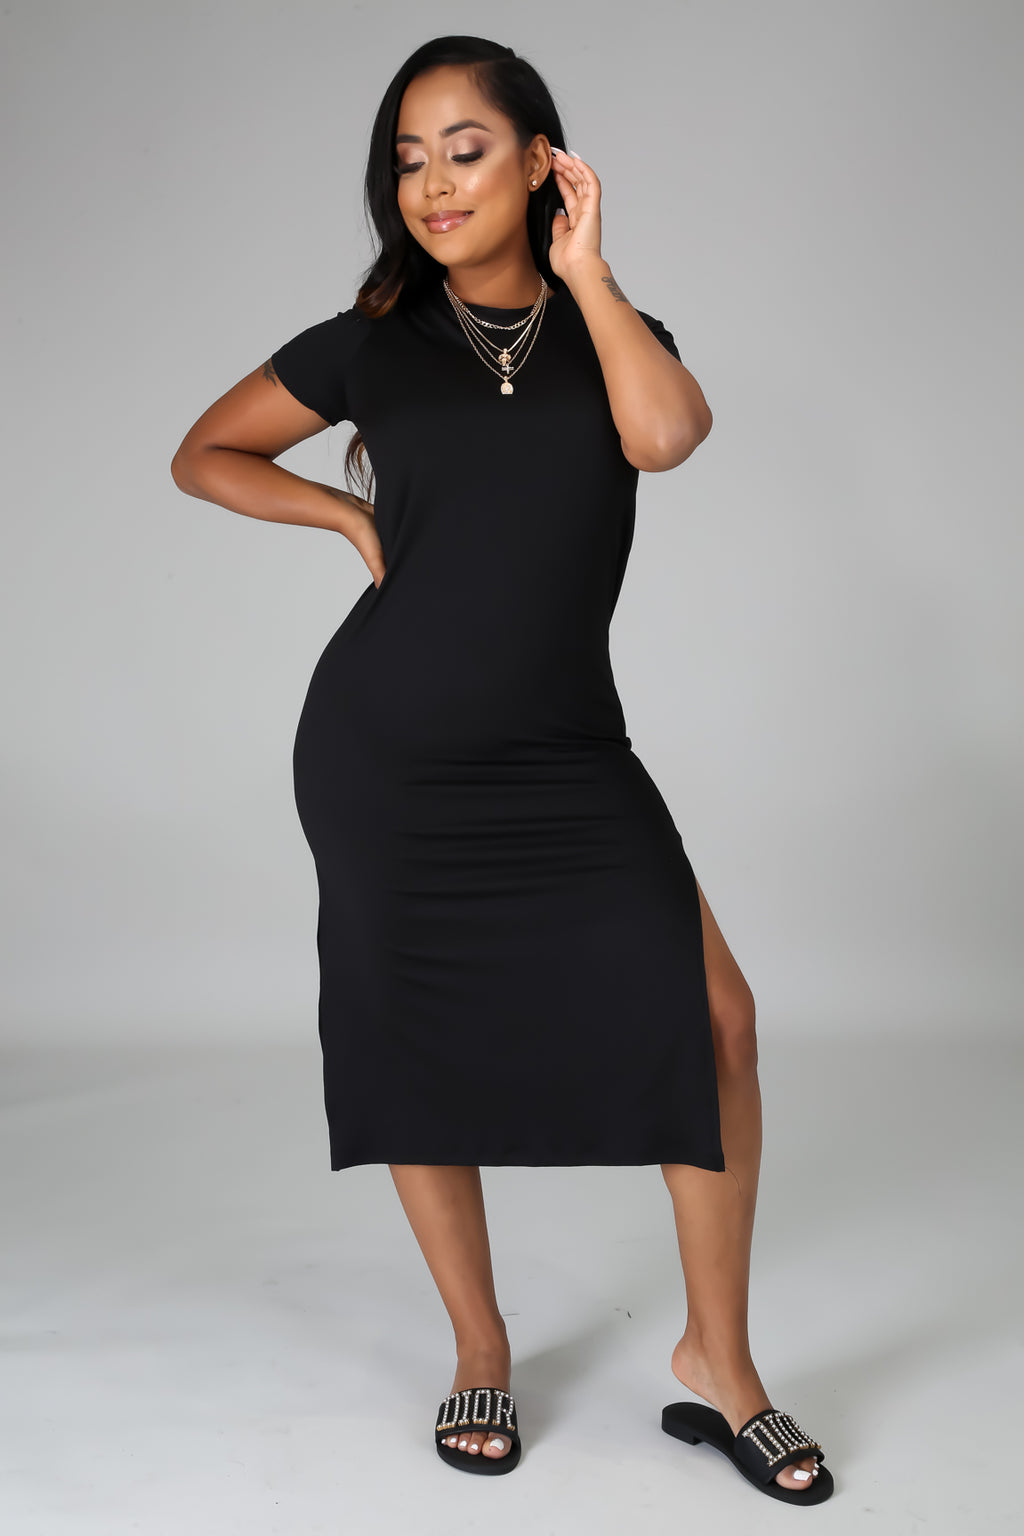 Let's Do This Dress - Classy & Sassy Styles Boutique